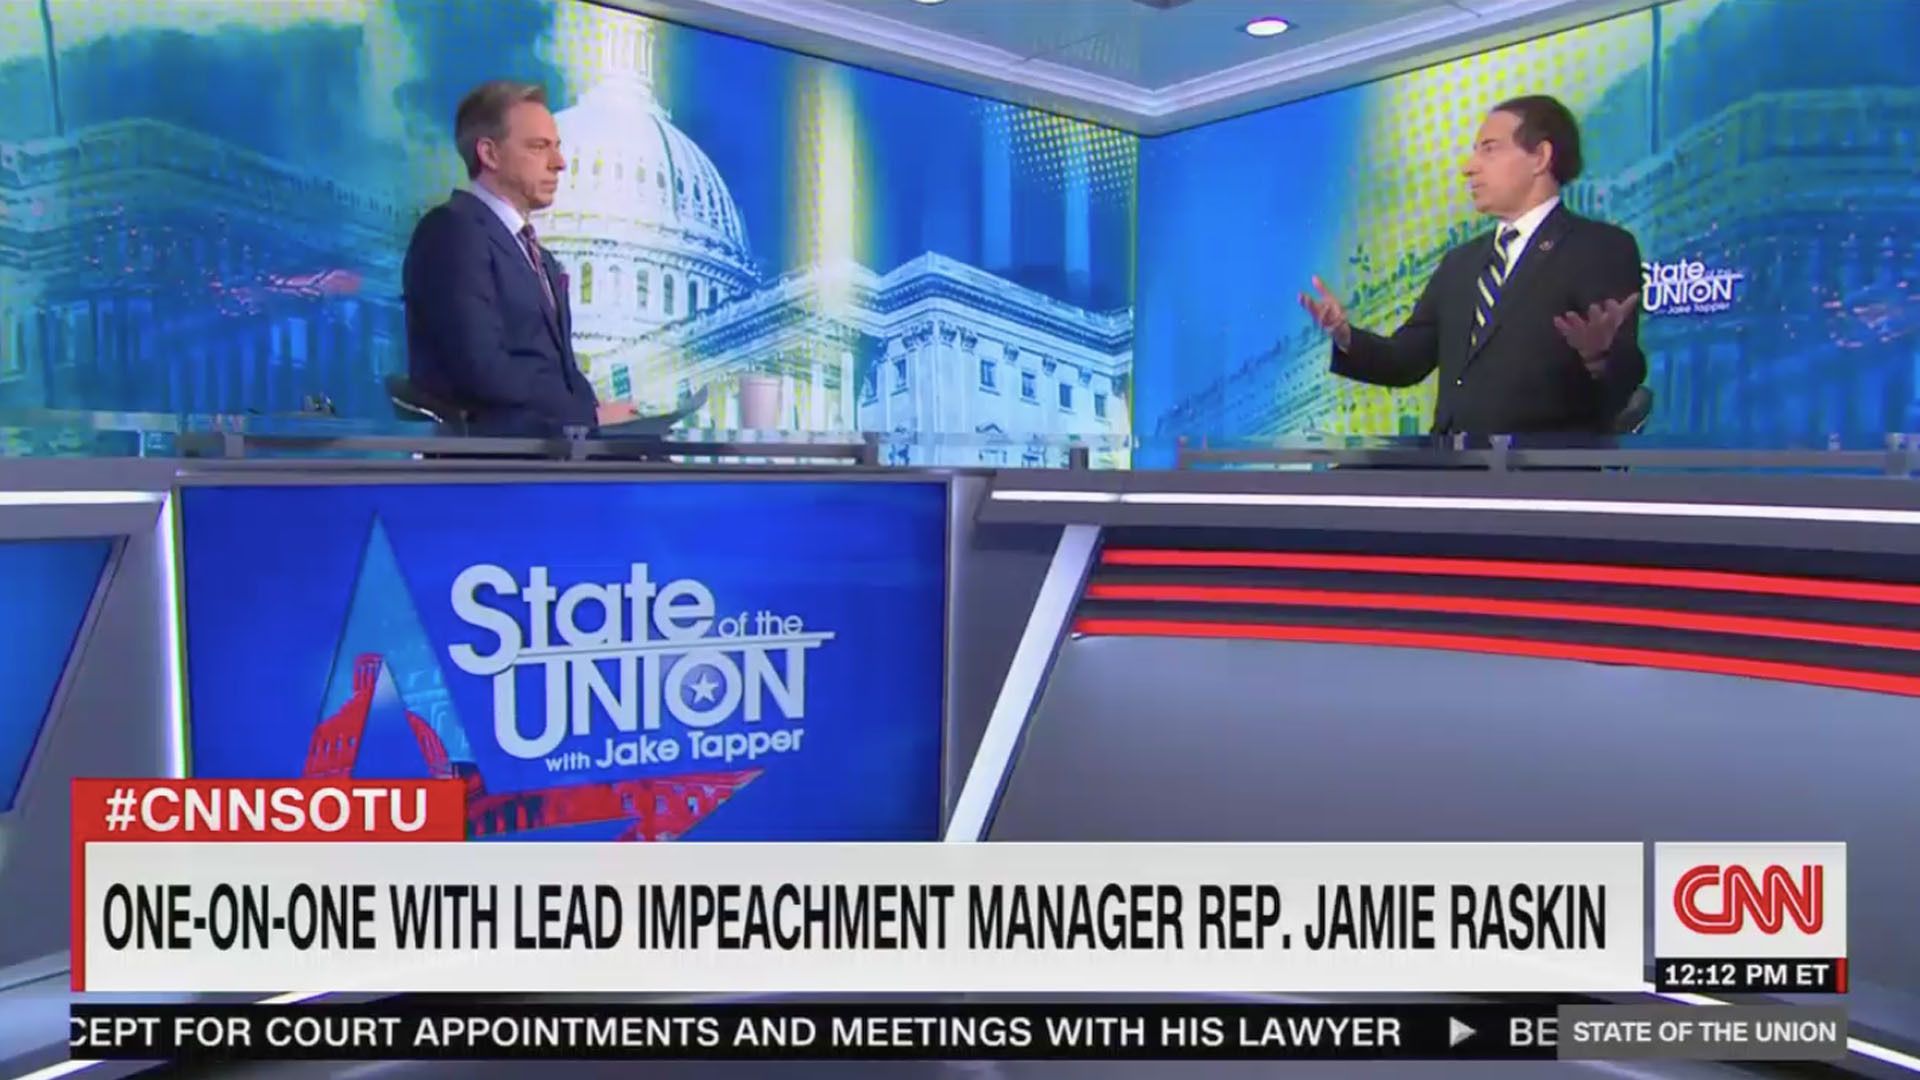 Rep. Jamie Raskin is seen in a screenshot speaking with CNN State of the Union host Jake Tapper.